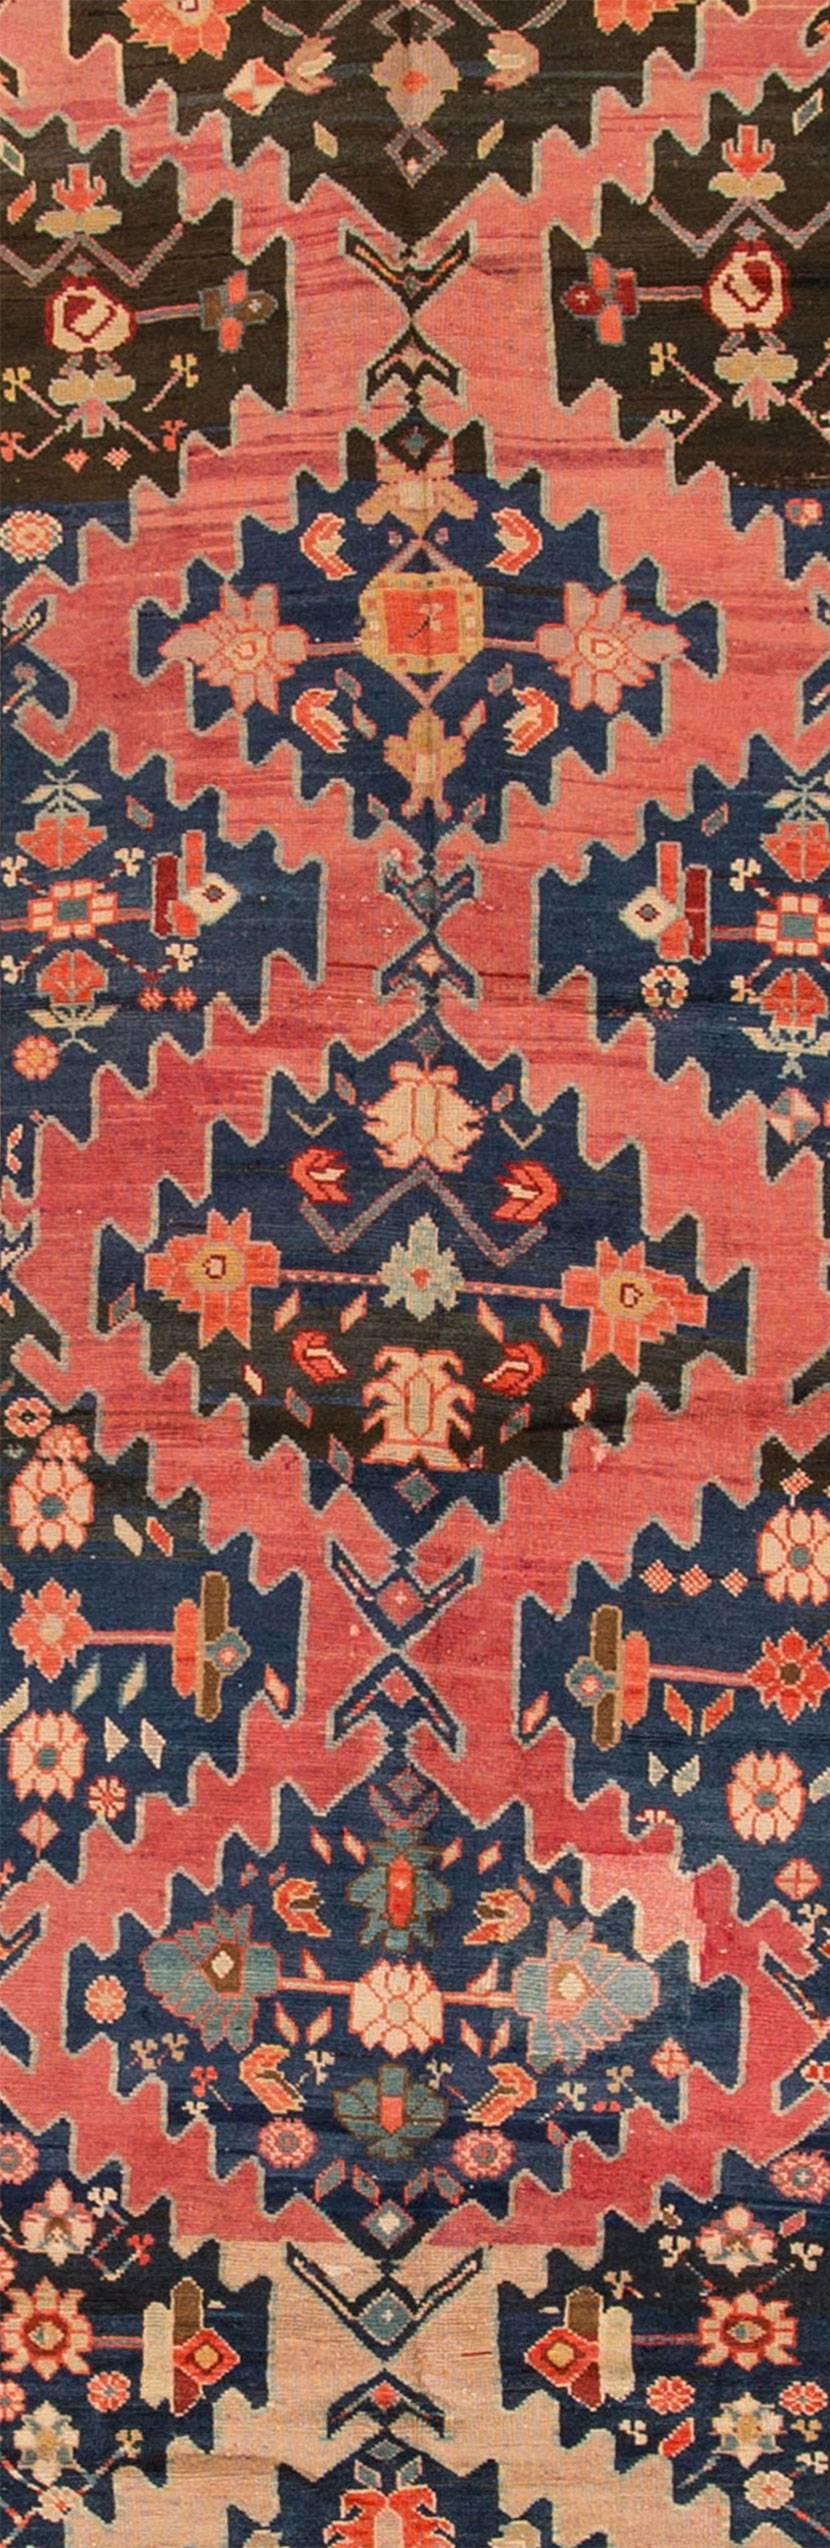 Early 1900s Multicolored Russian Karabagh Rug In Excellent Condition For Sale In Norwalk, CT